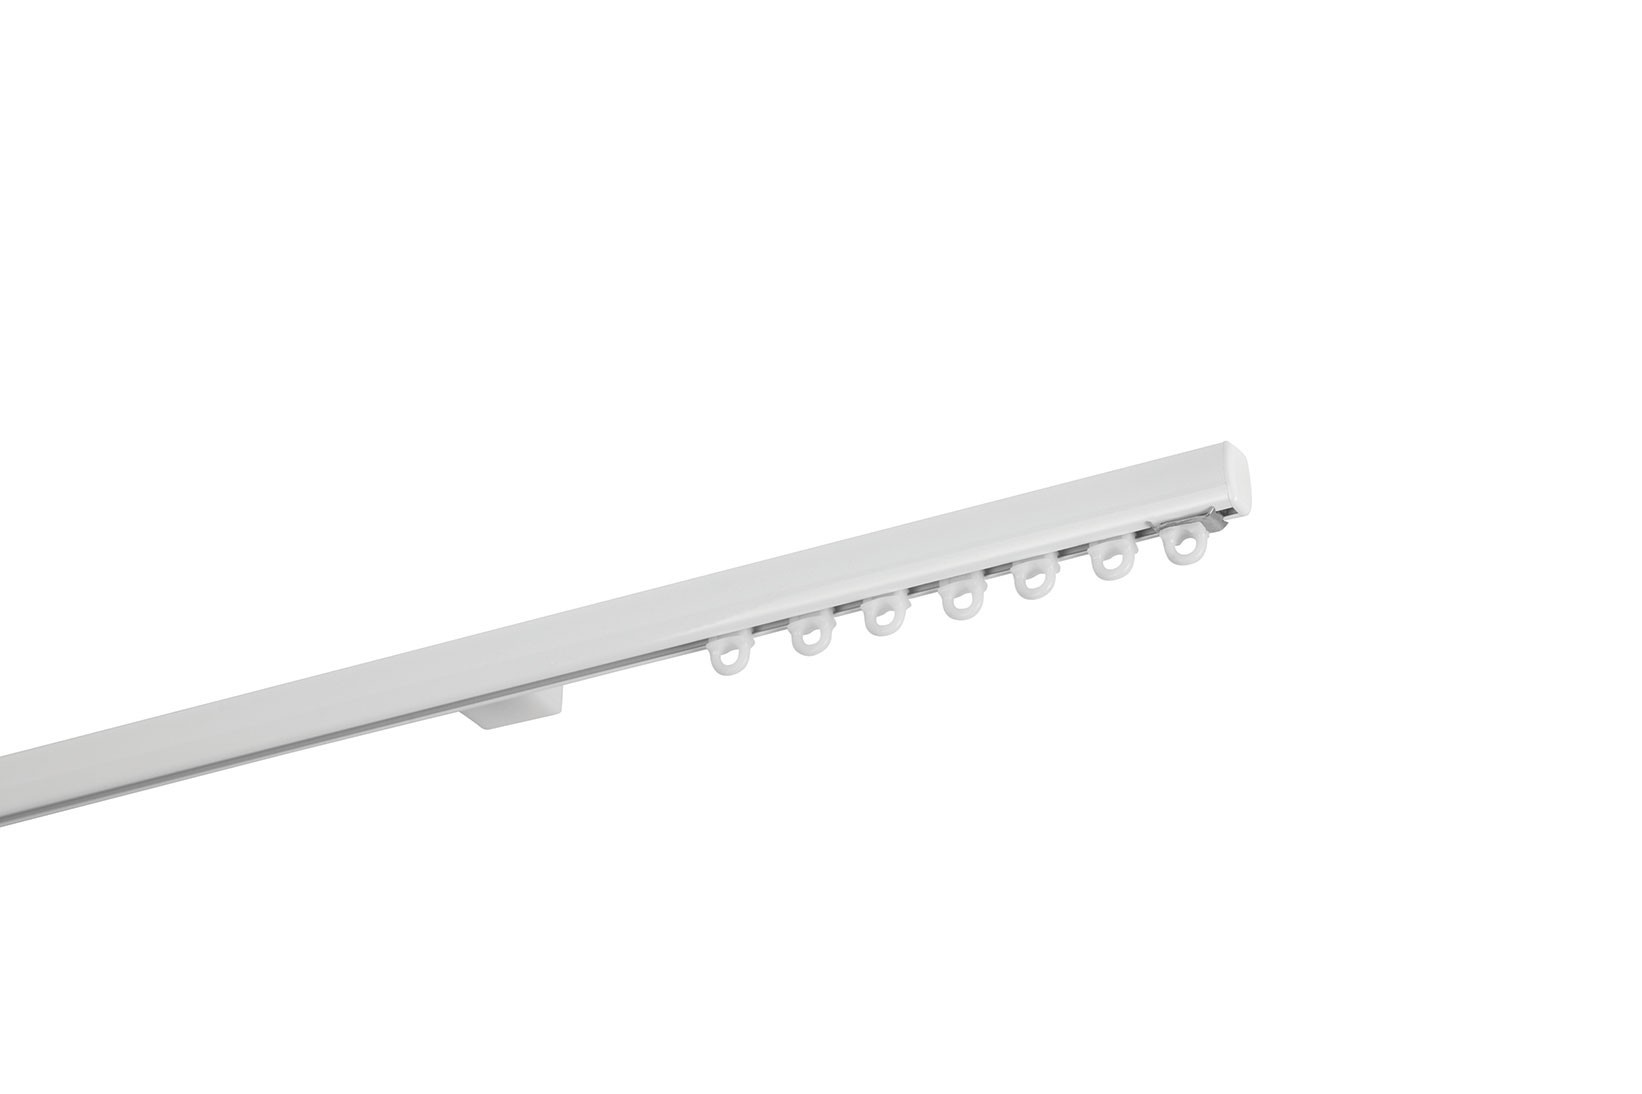 2102 manually operated curtain rails